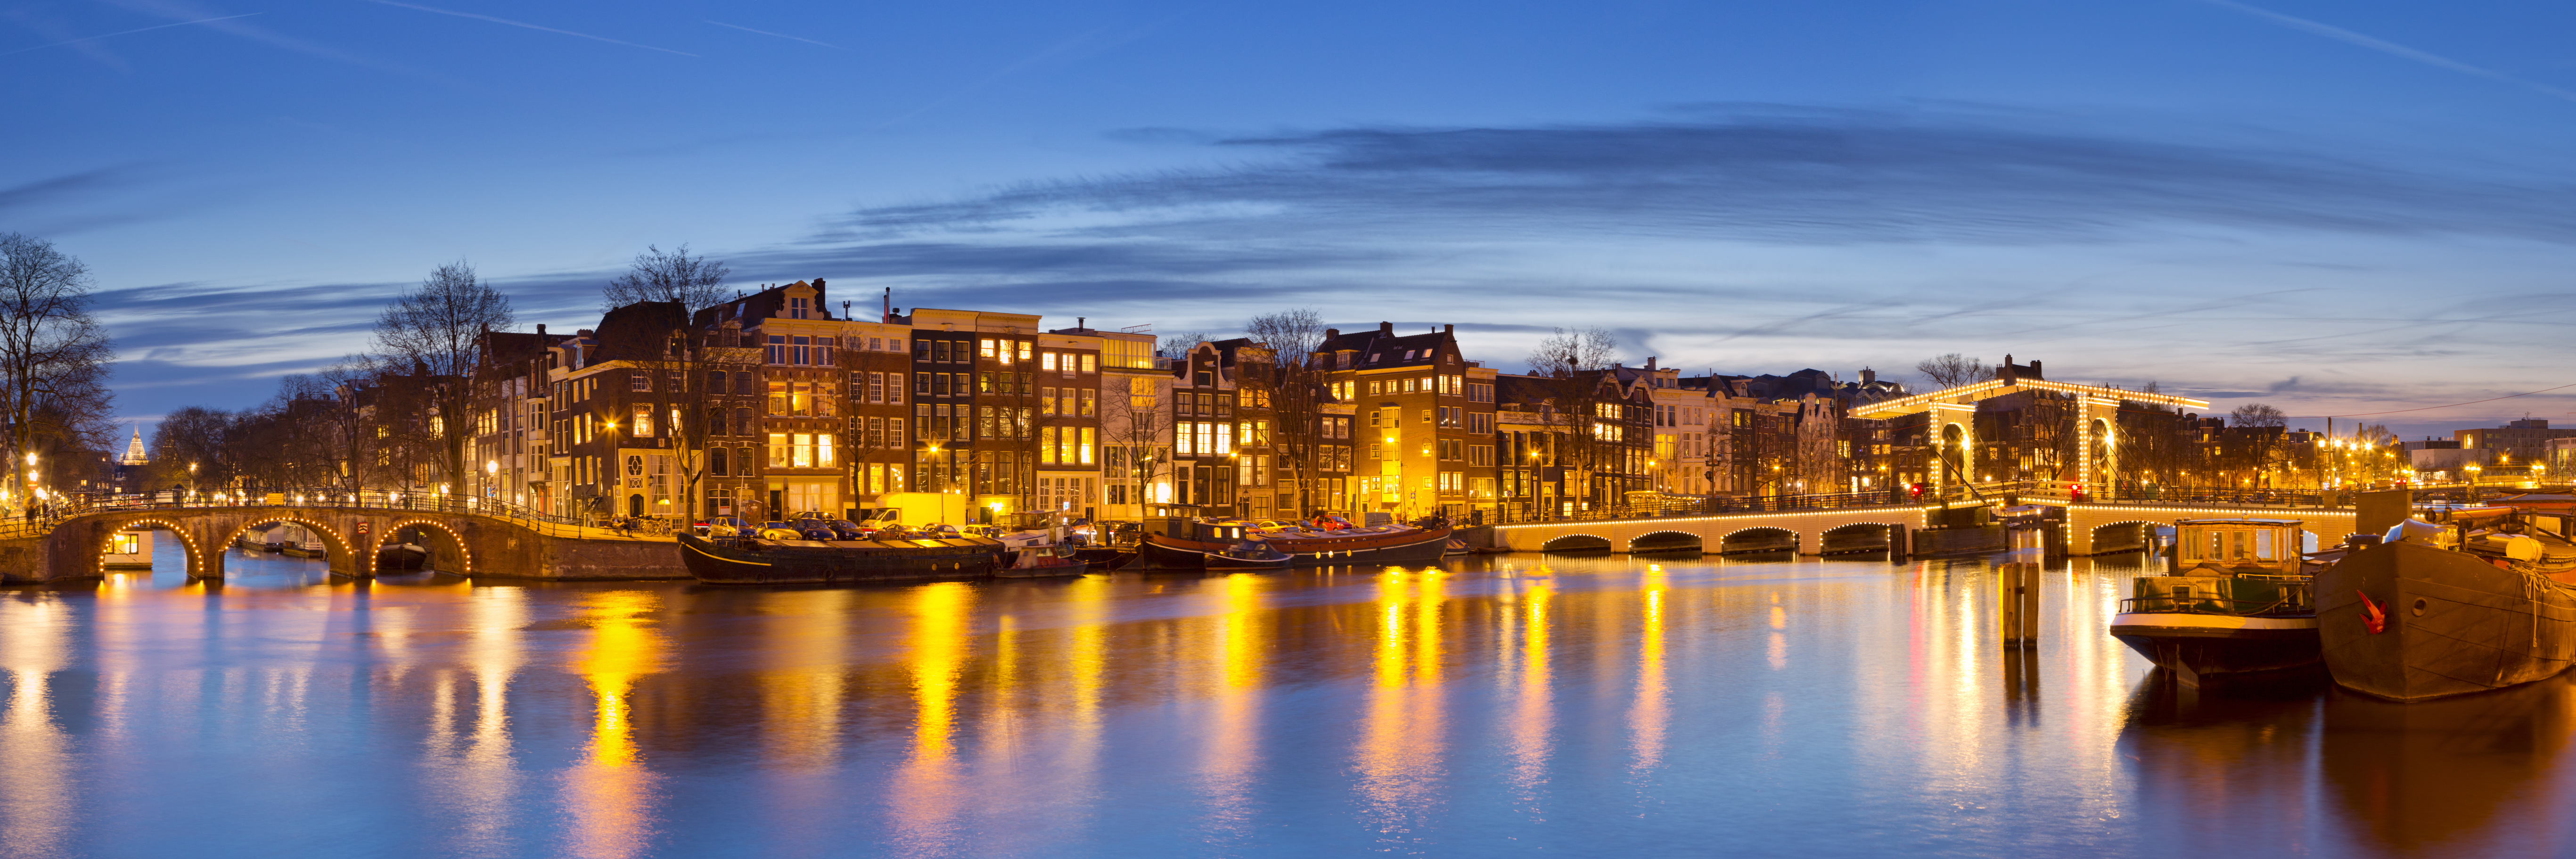 The skinny bridge and typical 17th century houses along Amstel river in Amsterdam